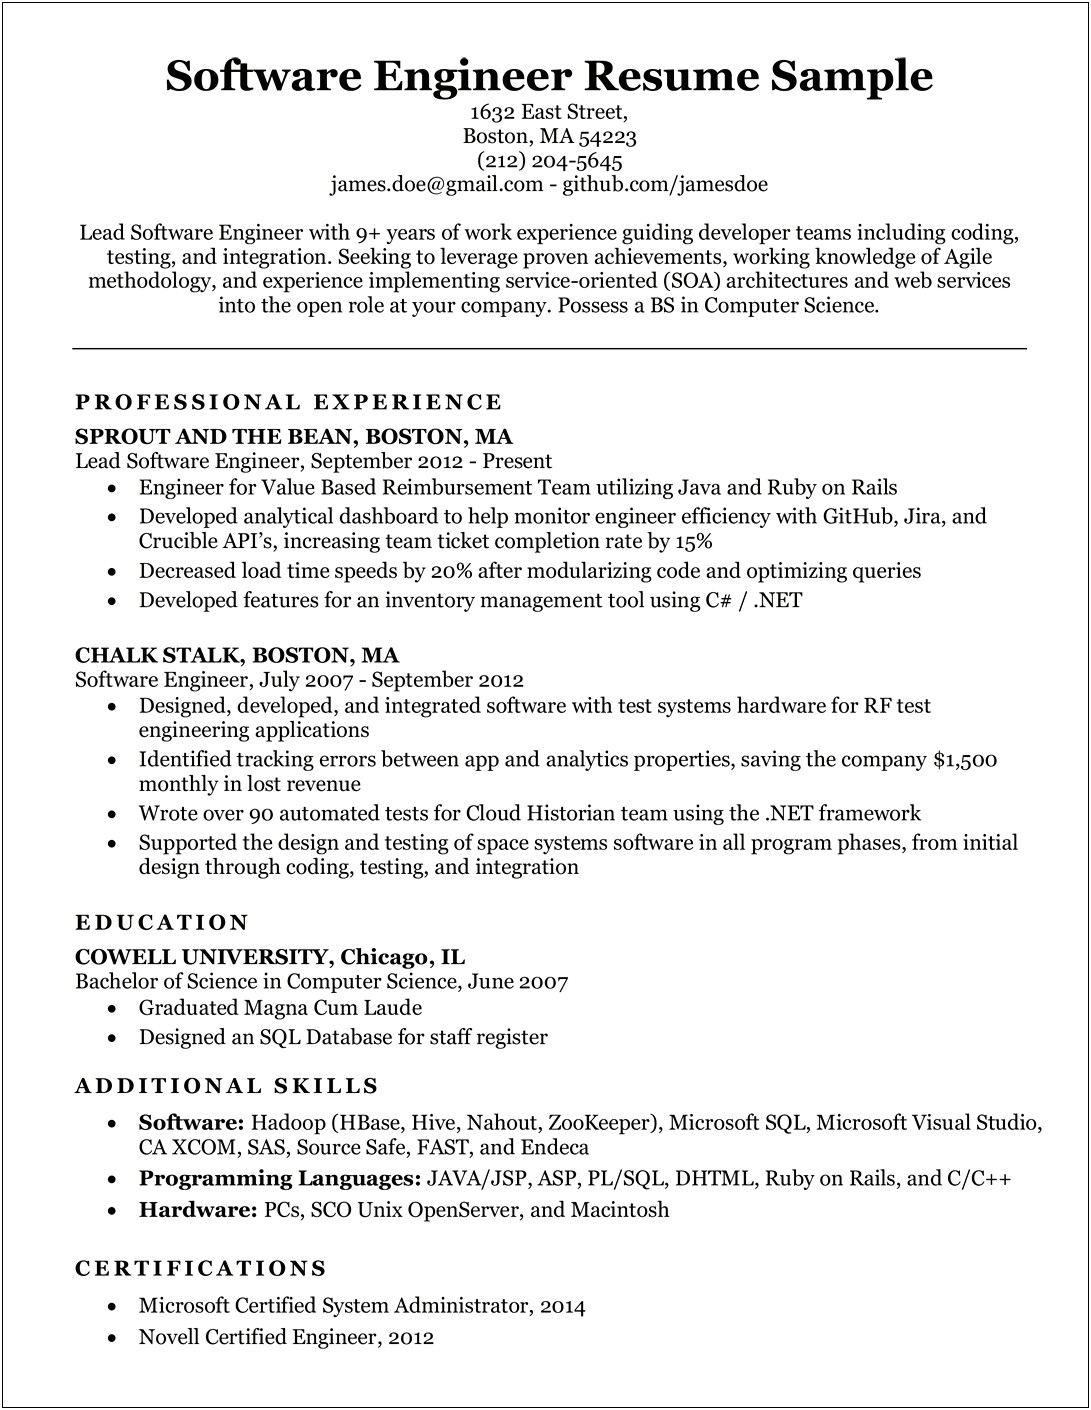 Computer Science Professional Resume Sample